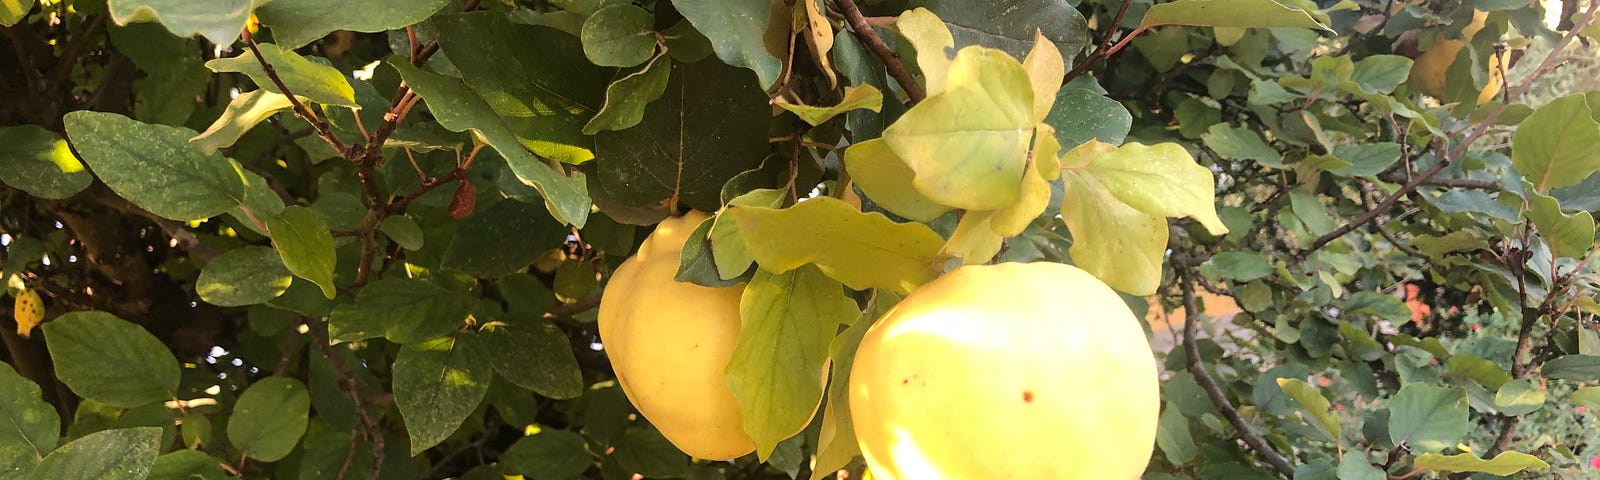 Quince in Benedita’s garden. Photo credit by the Author: Chris H